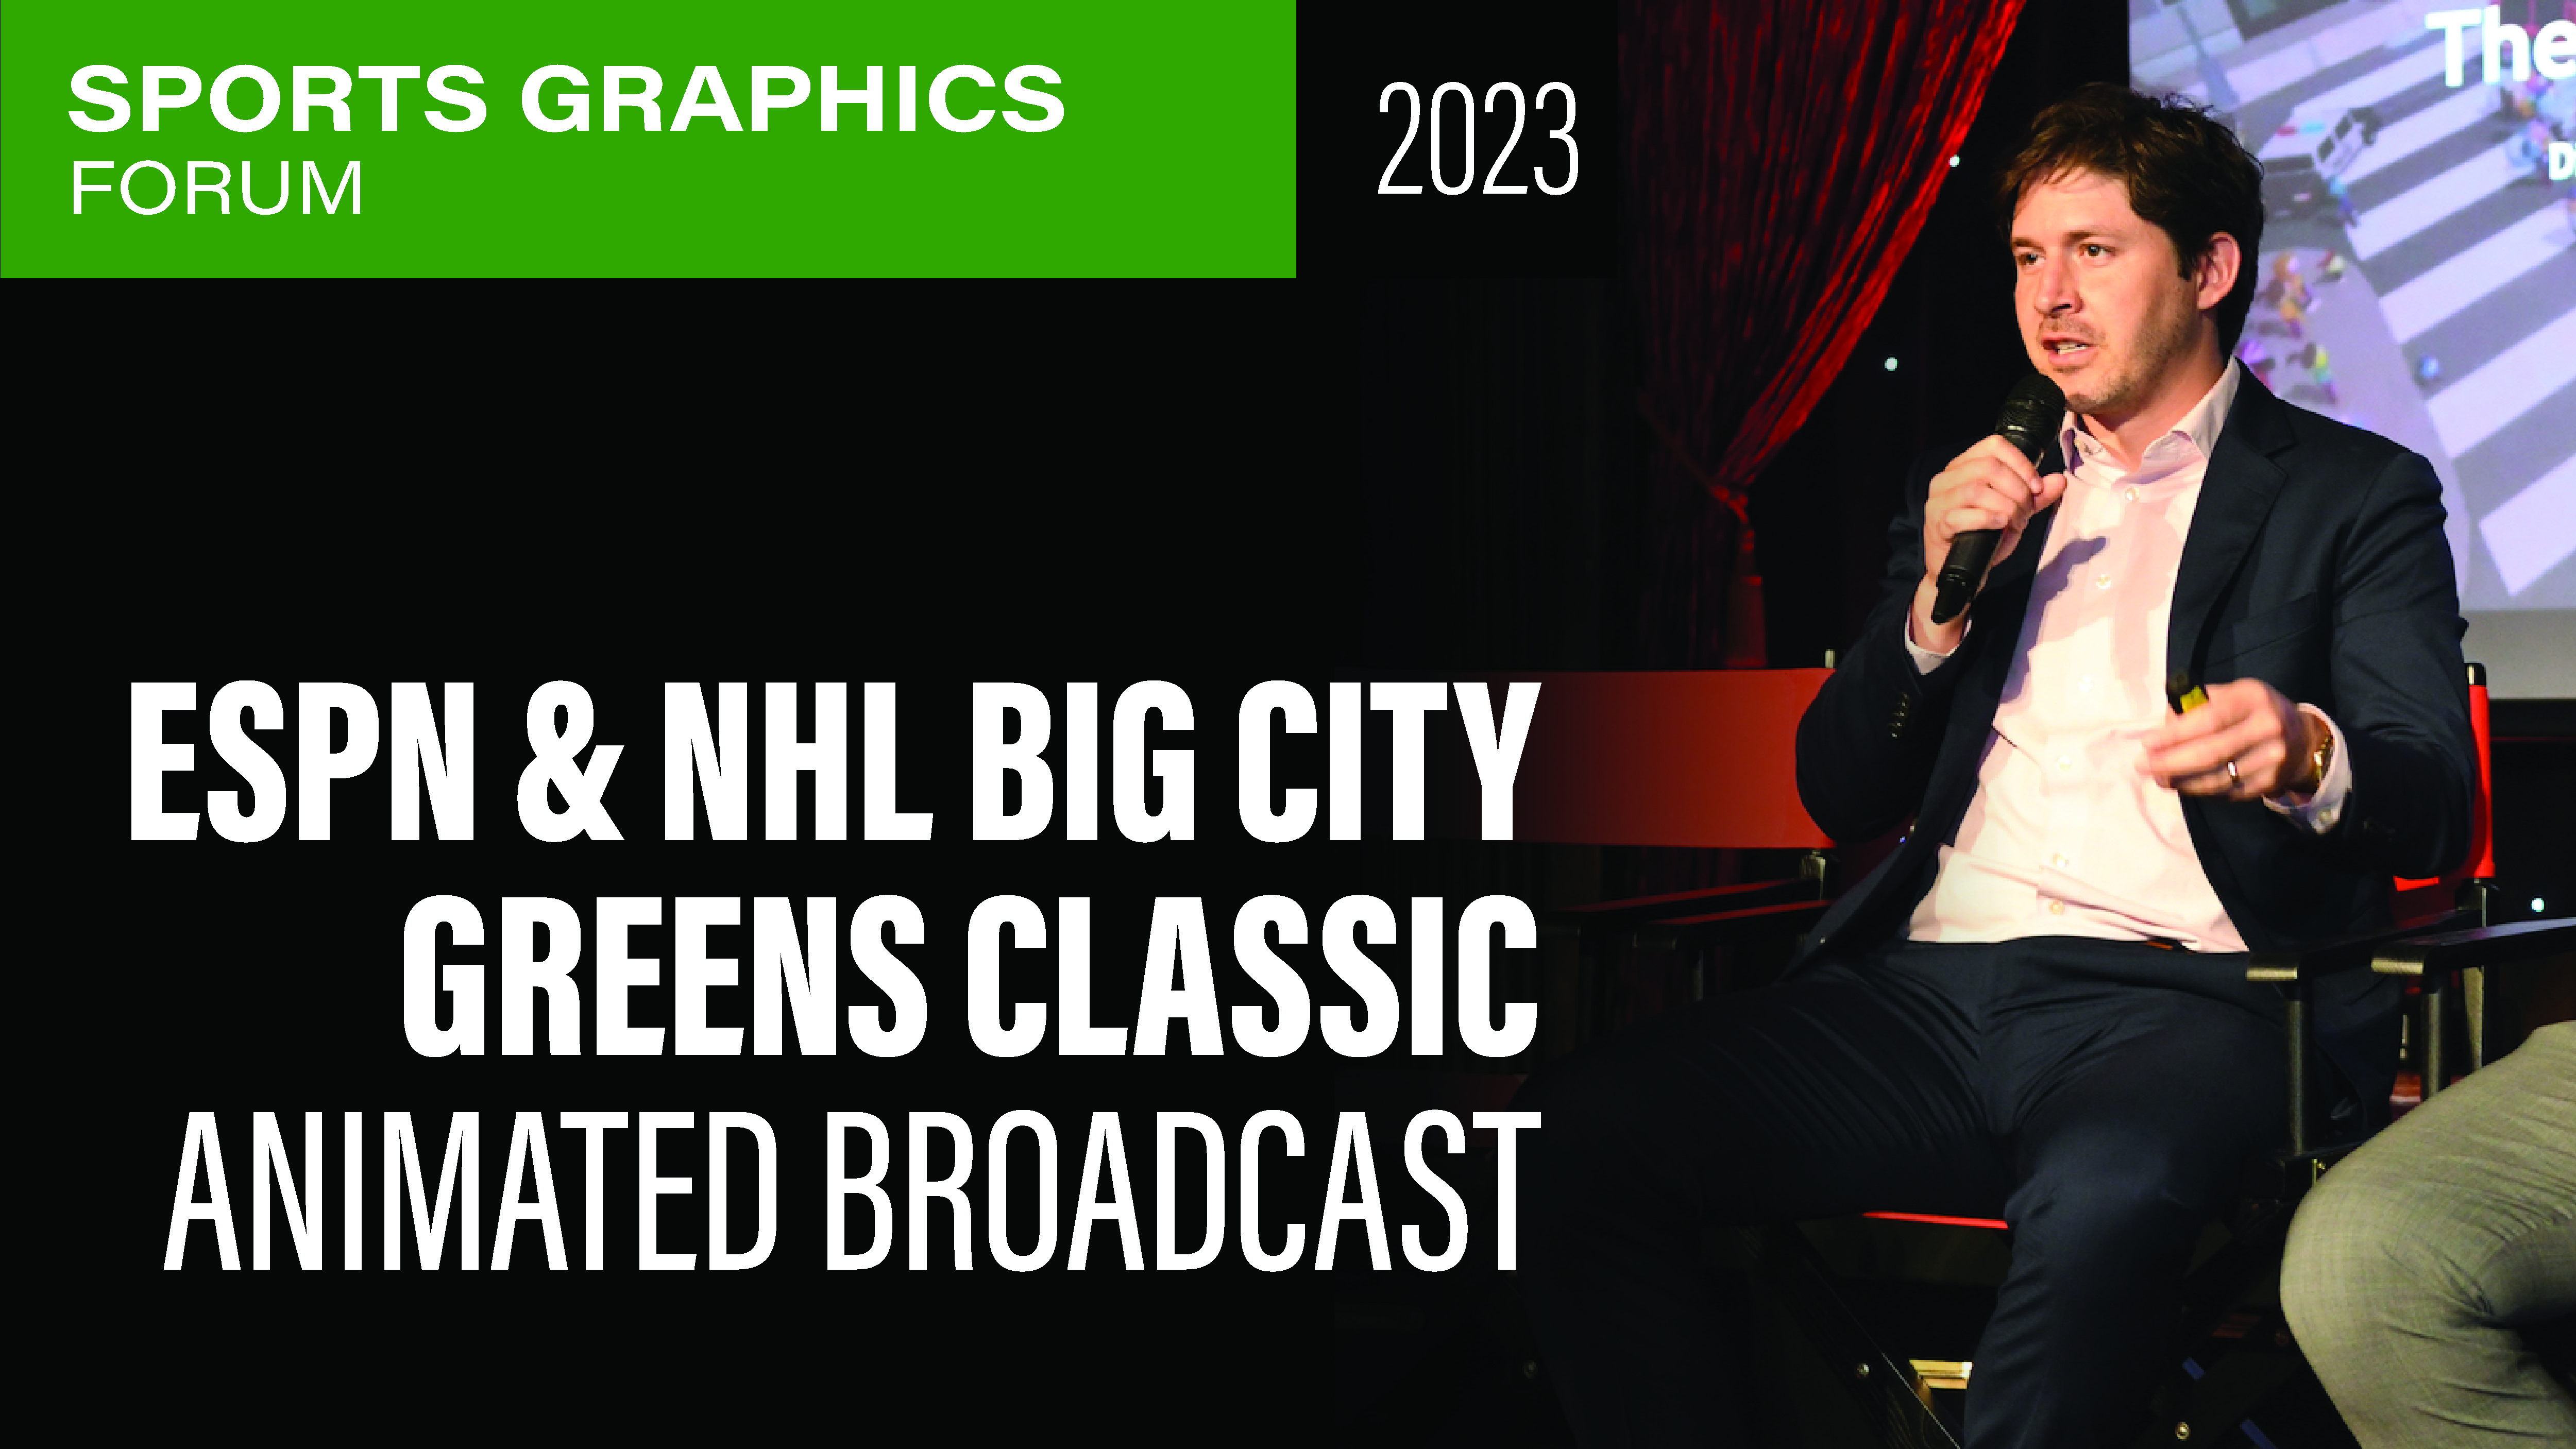 NHL Big City Greens Classic How ESPN Pulled Off the Animated Broadcast - SVG Sports Graphics Forum 2023